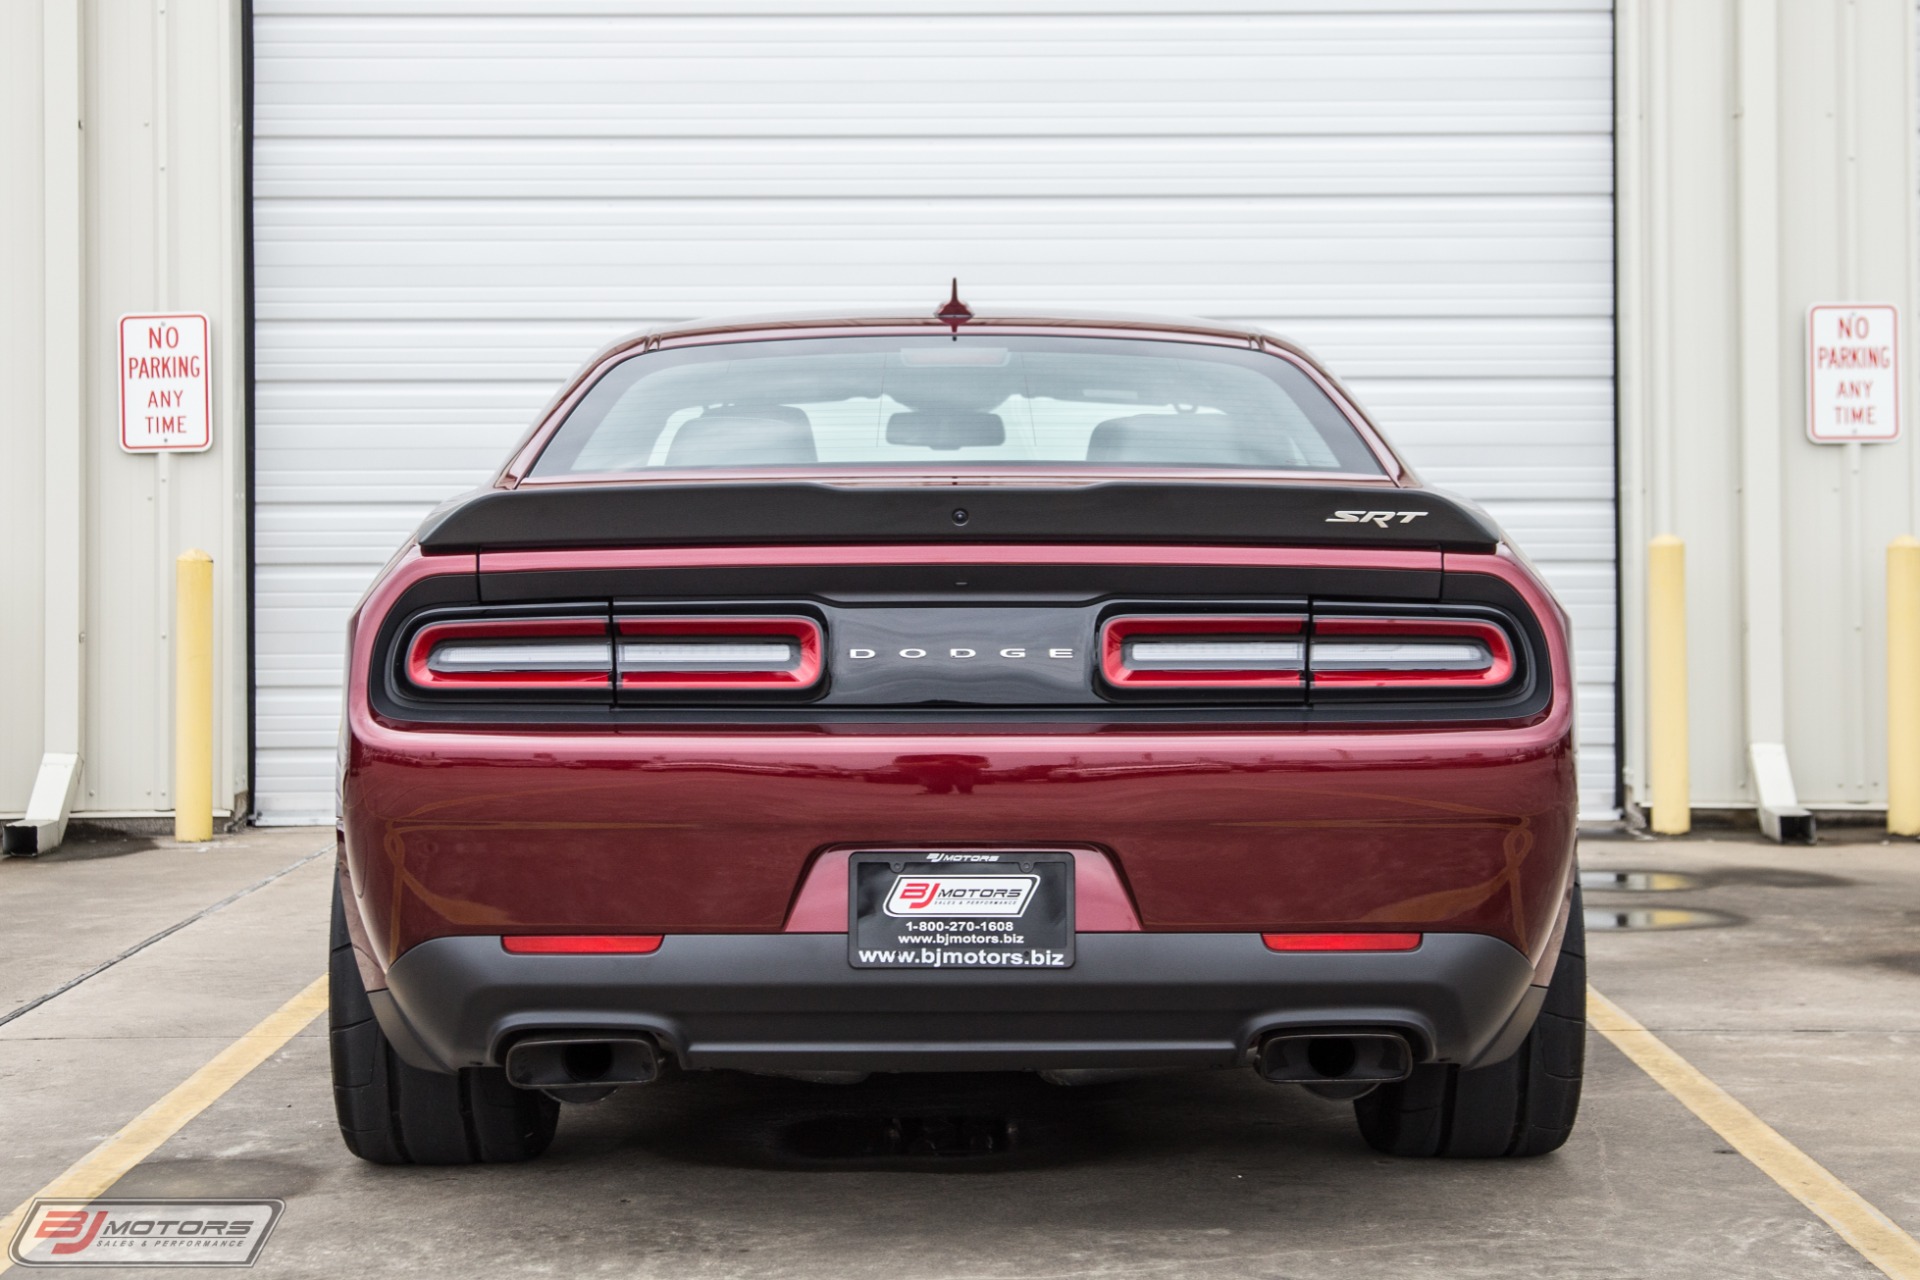 Used-2018-Dodge-Challenger-SRT-Demon-Only-40-Miles-comes-with-Crate